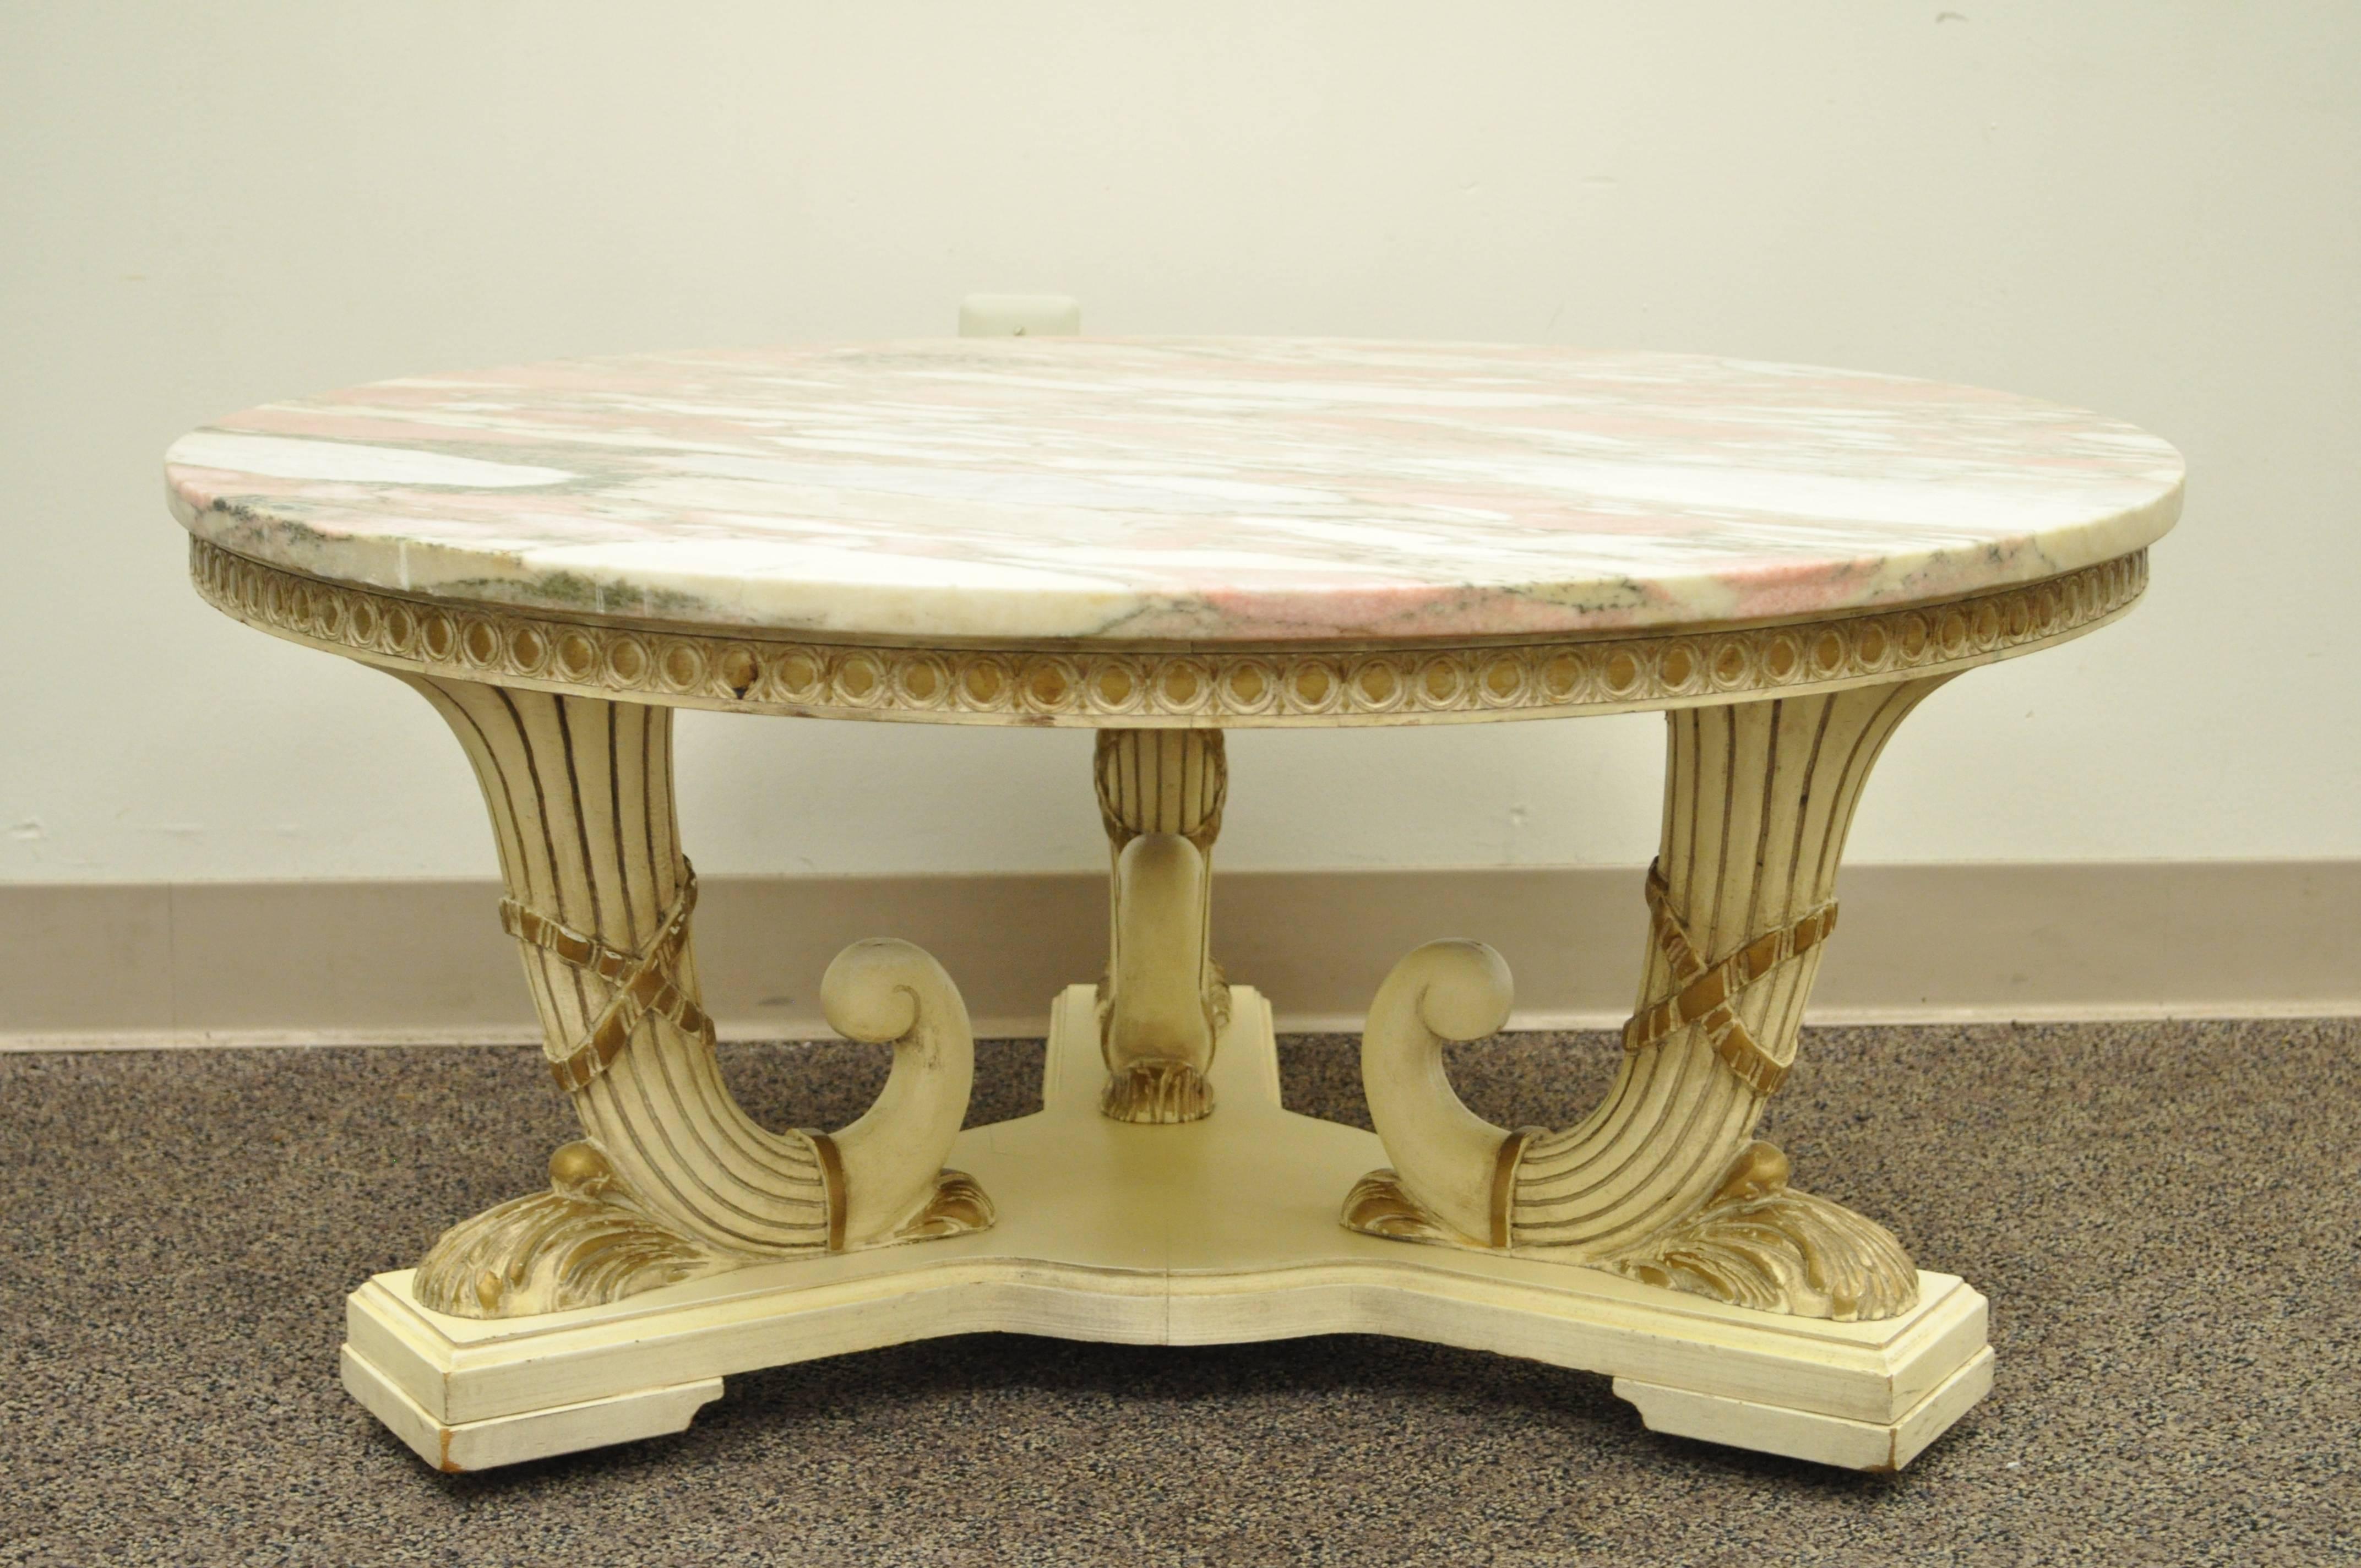 French Empire Neoclassical Cornucopia Base Round Pink Marble Top Coffee Table For Sale 2